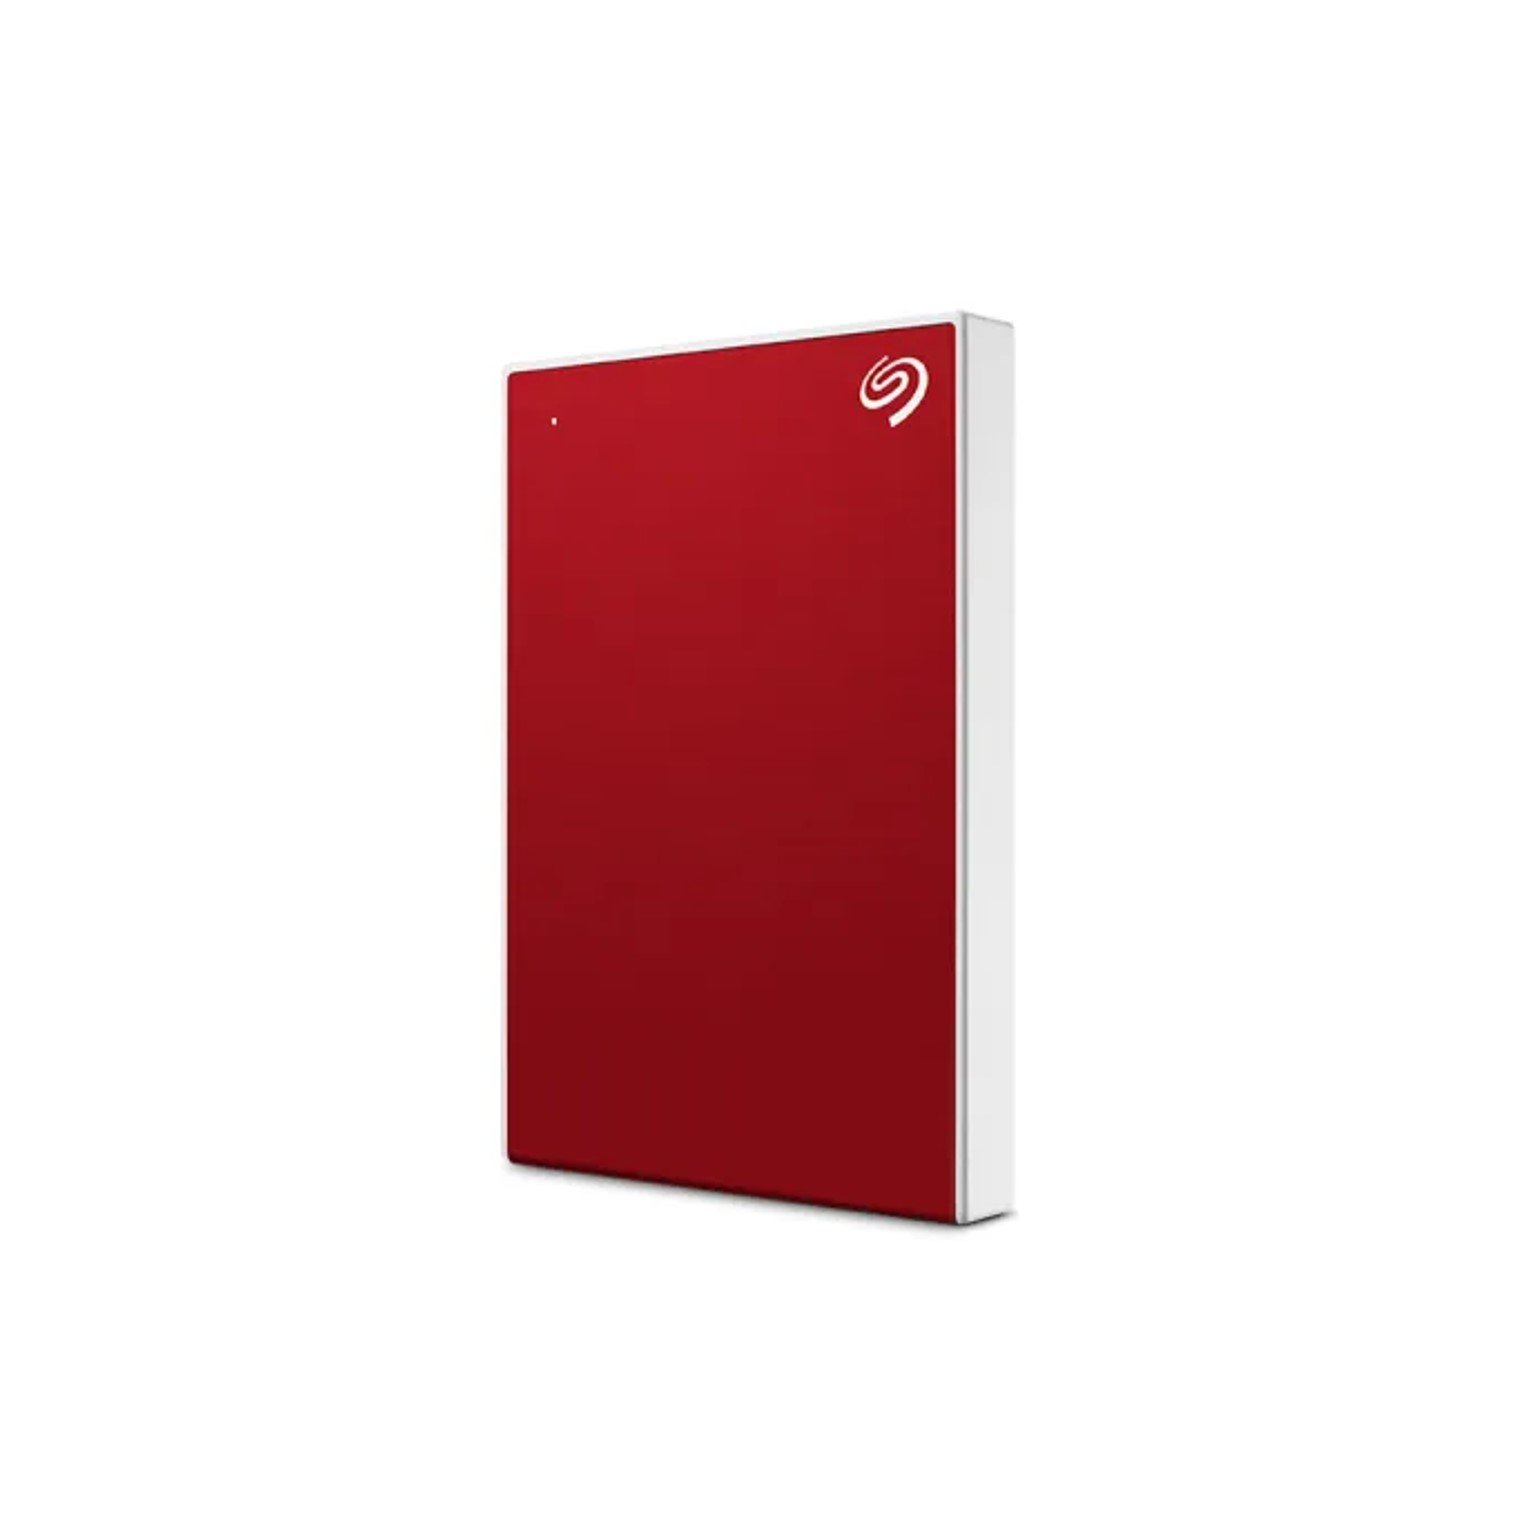 Seagate One Touch HDD with Password  NEW 2TB - USB3.0 - Red